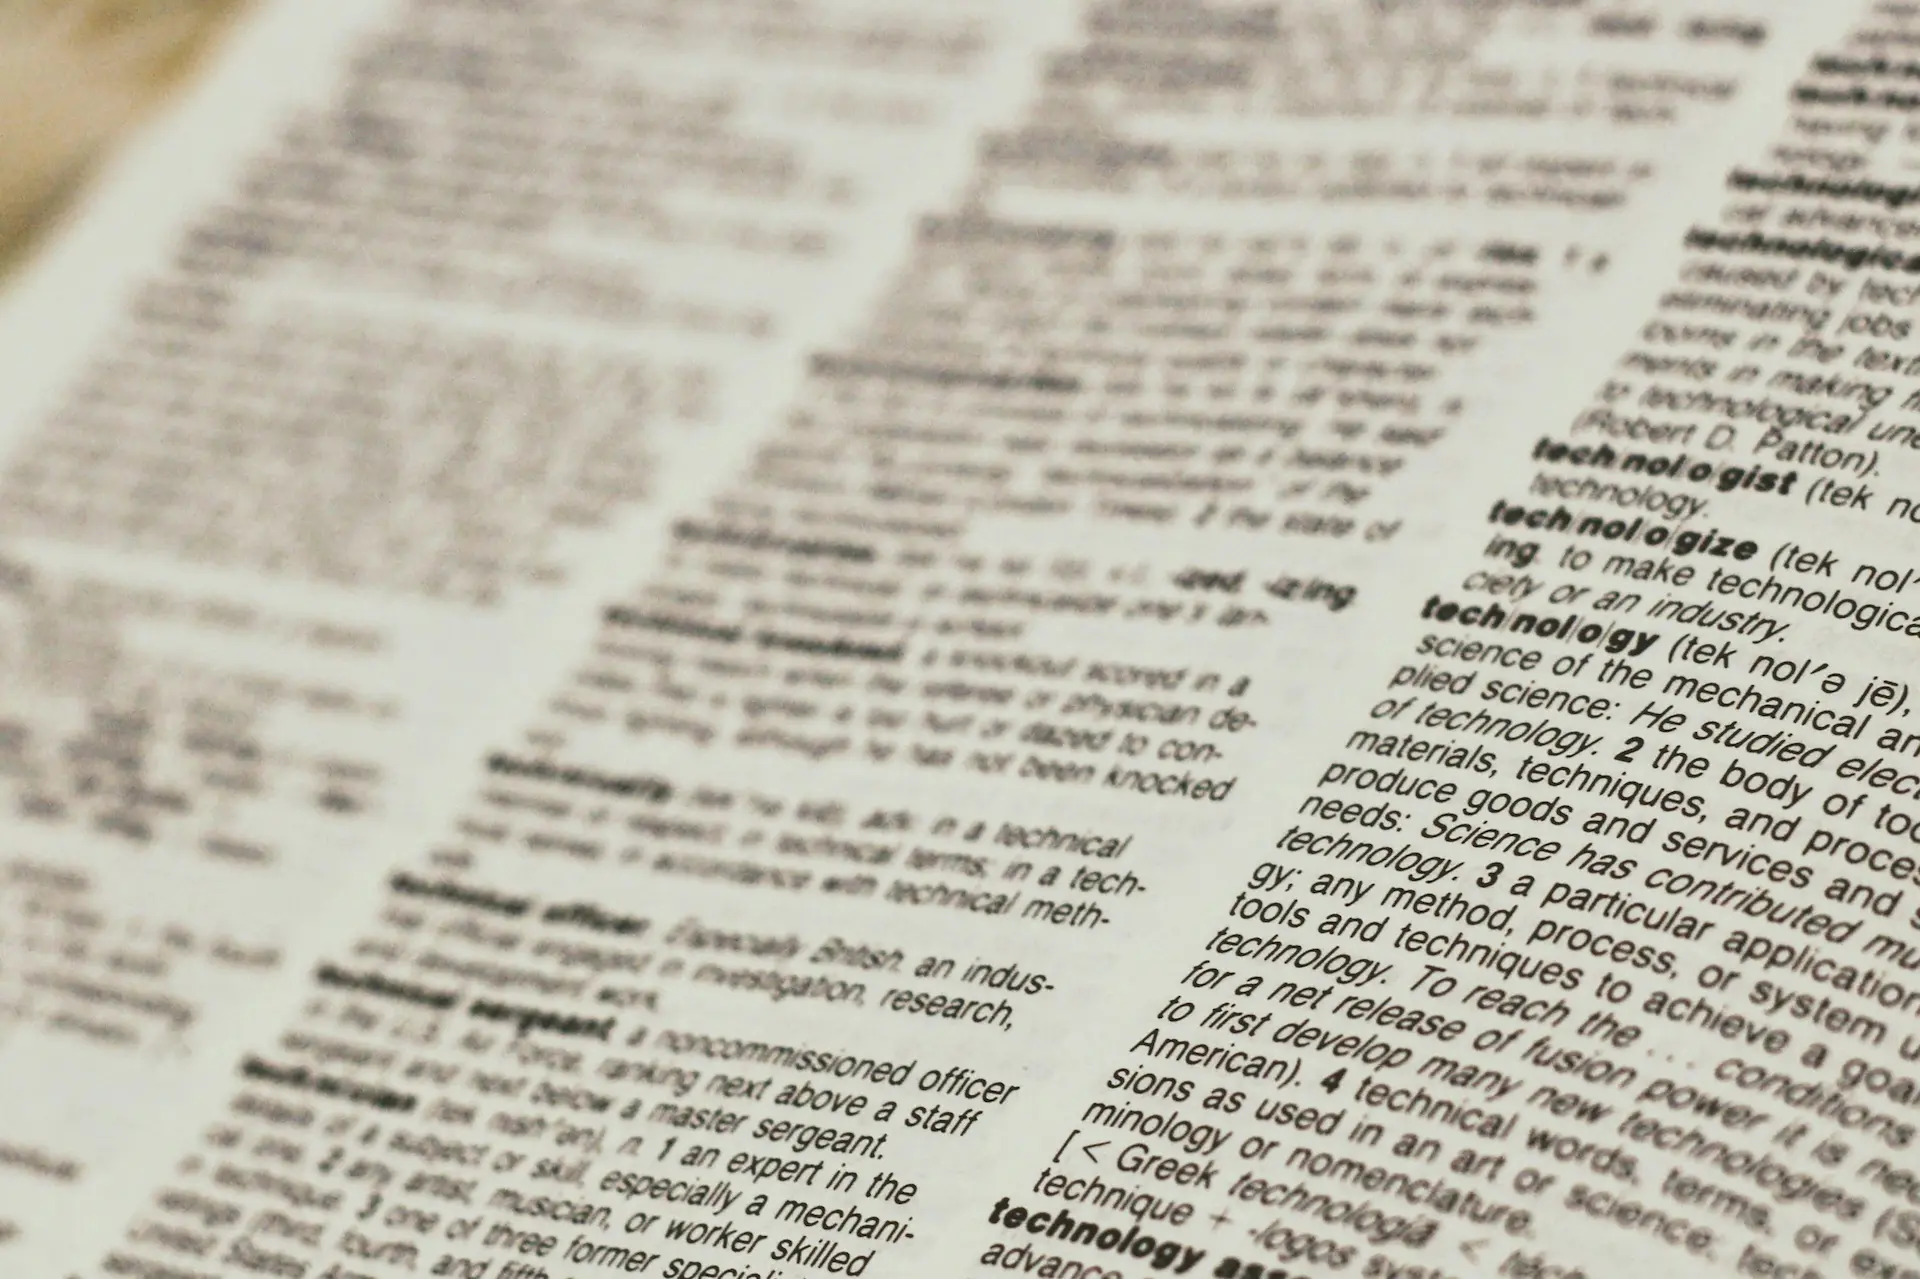 Picture of a page from a dictionary with the word “technology” being in focus.